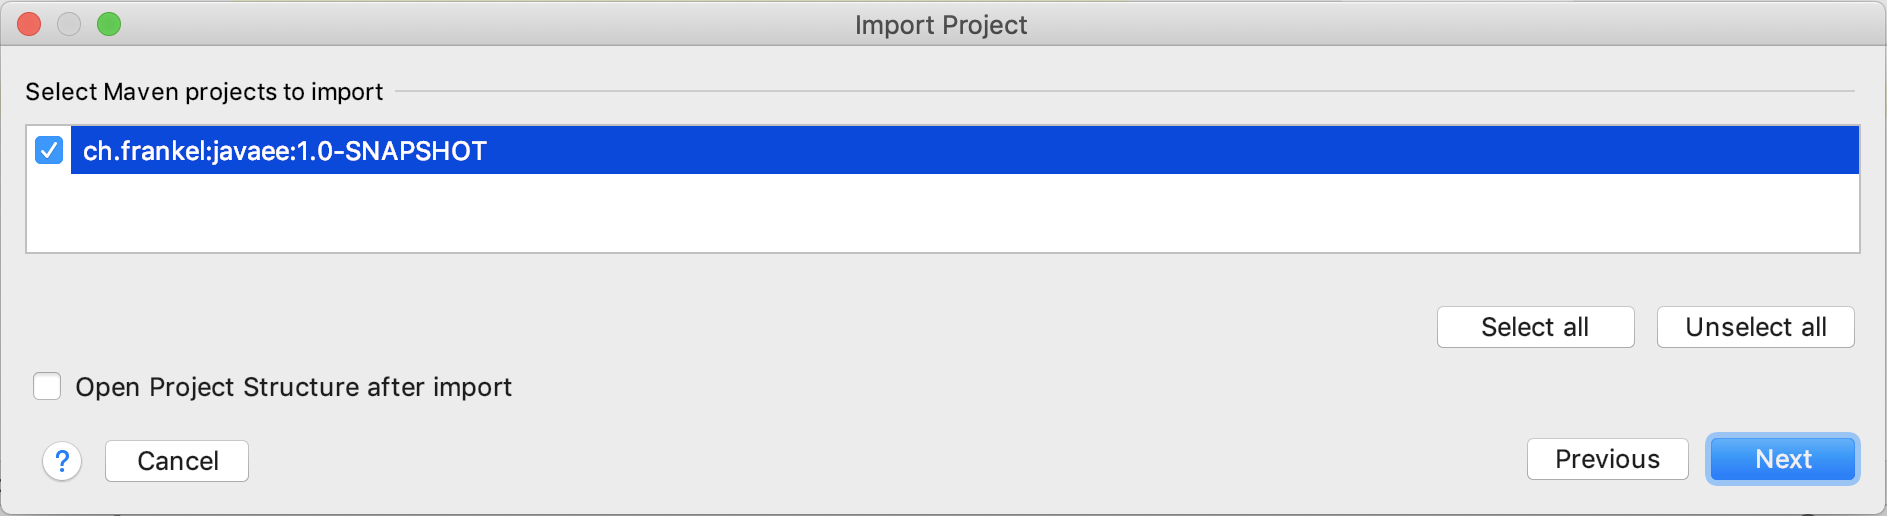 Import Project - step 3